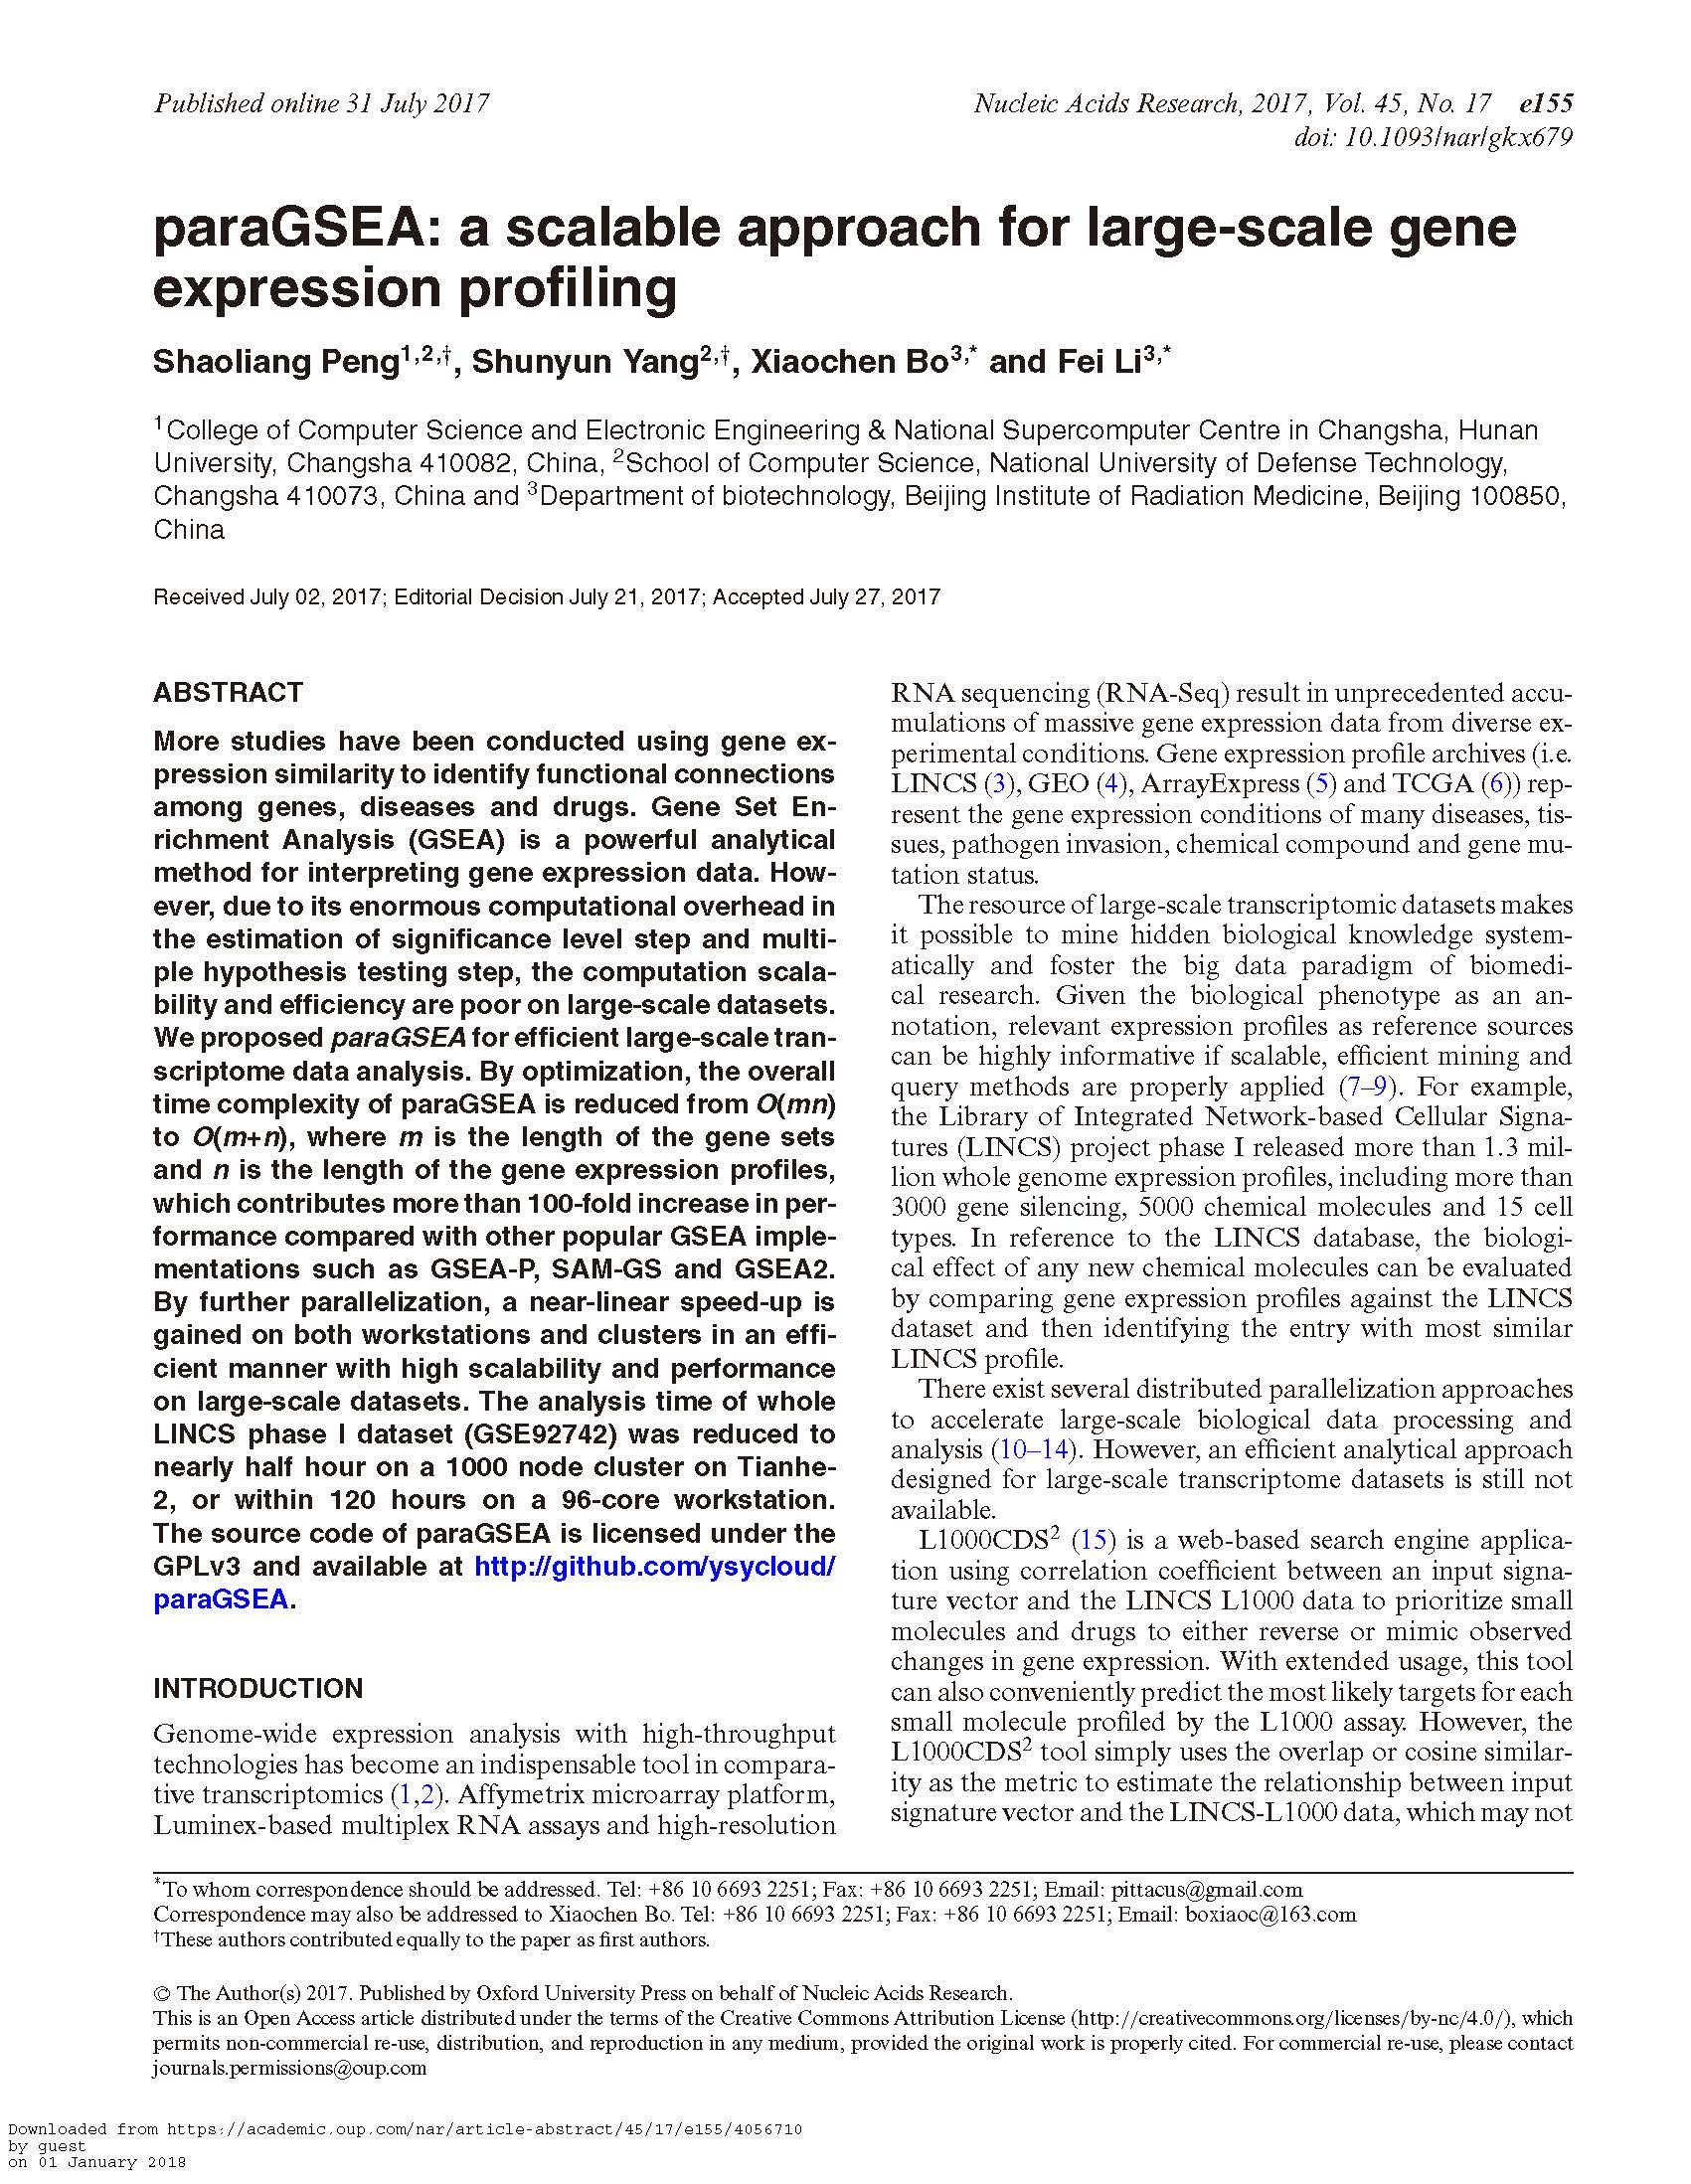 [89] Peng, S., Yang, S.,Bo, X., & Li, F. (2017). paraGSEA: a scalable approach for large-scale gene expression profiling. Nucleic acids research, 45(17), e155-e155